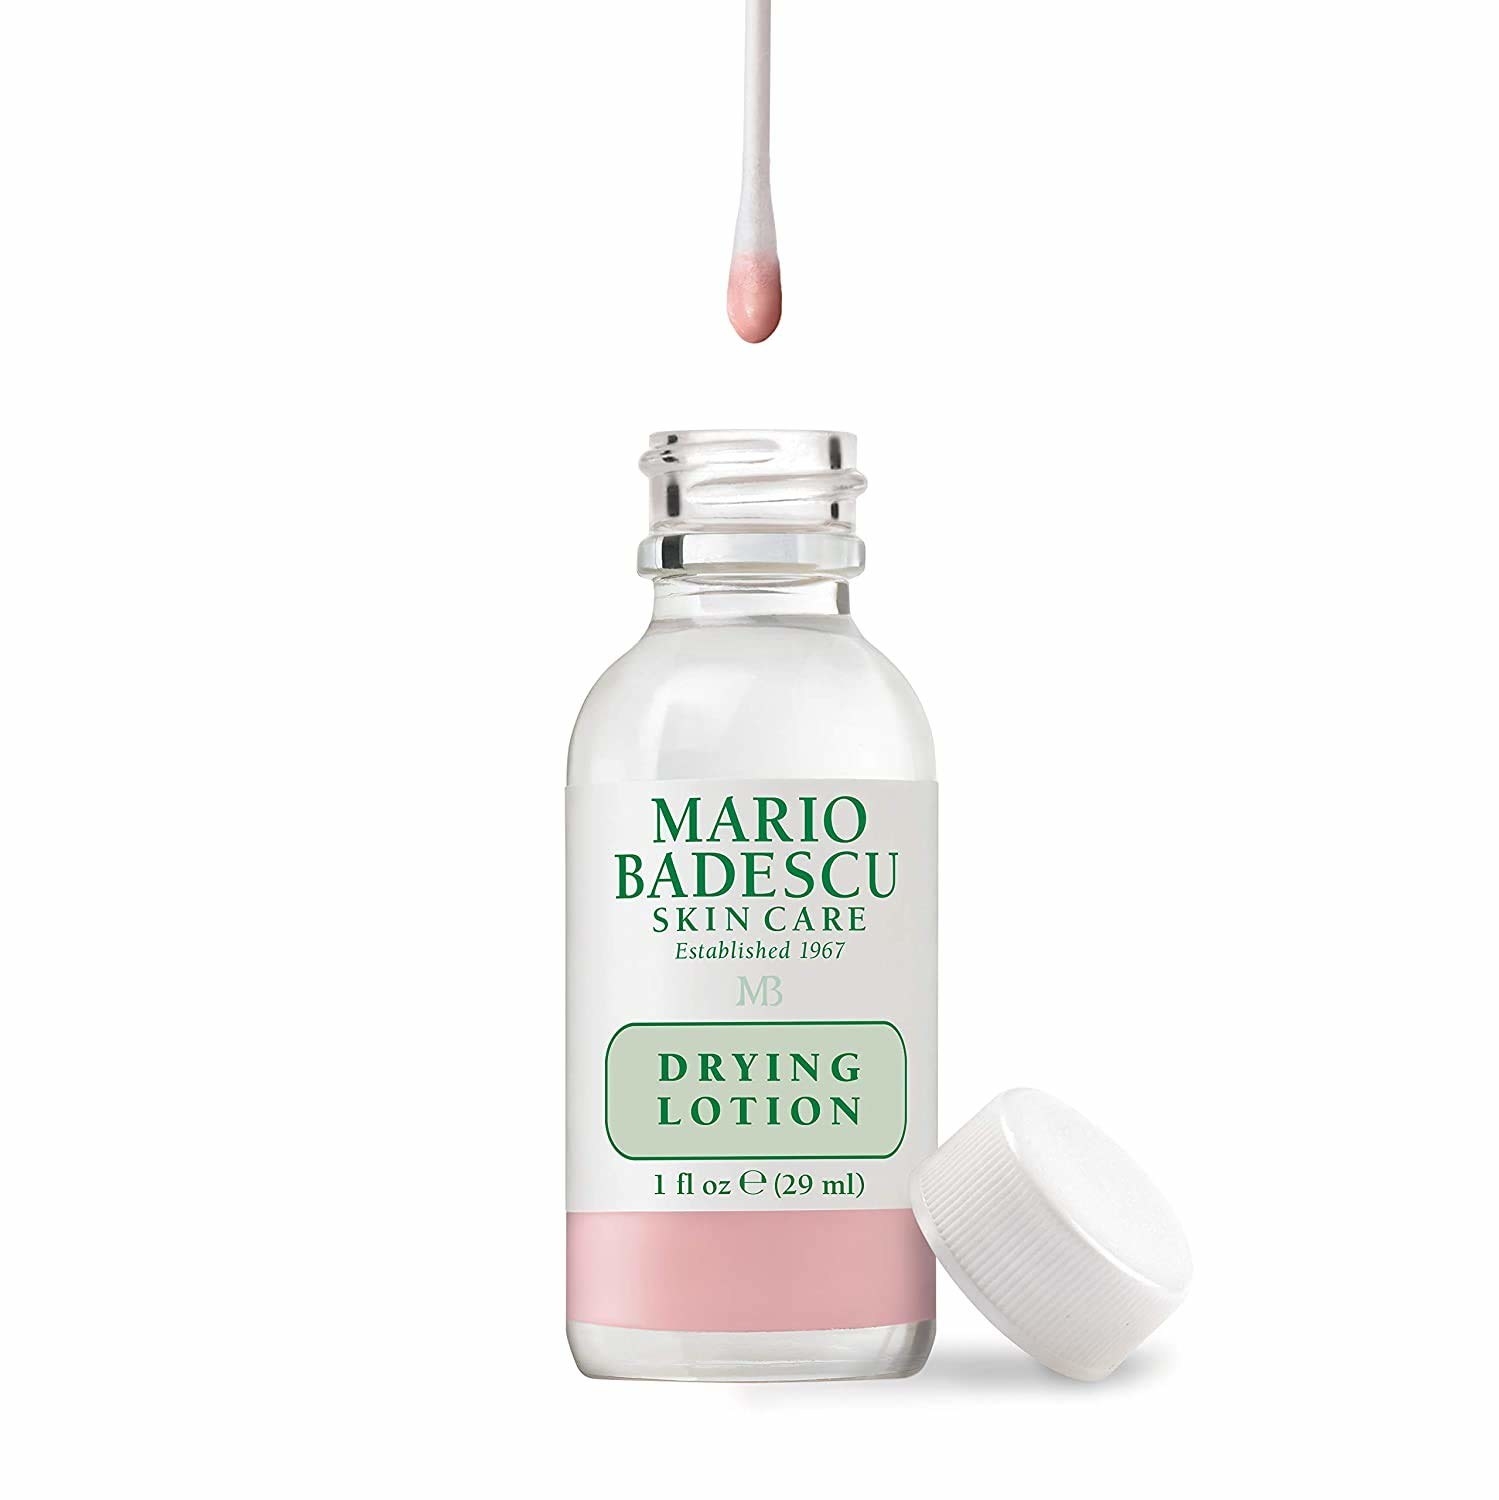 A drying lotion spot treatment